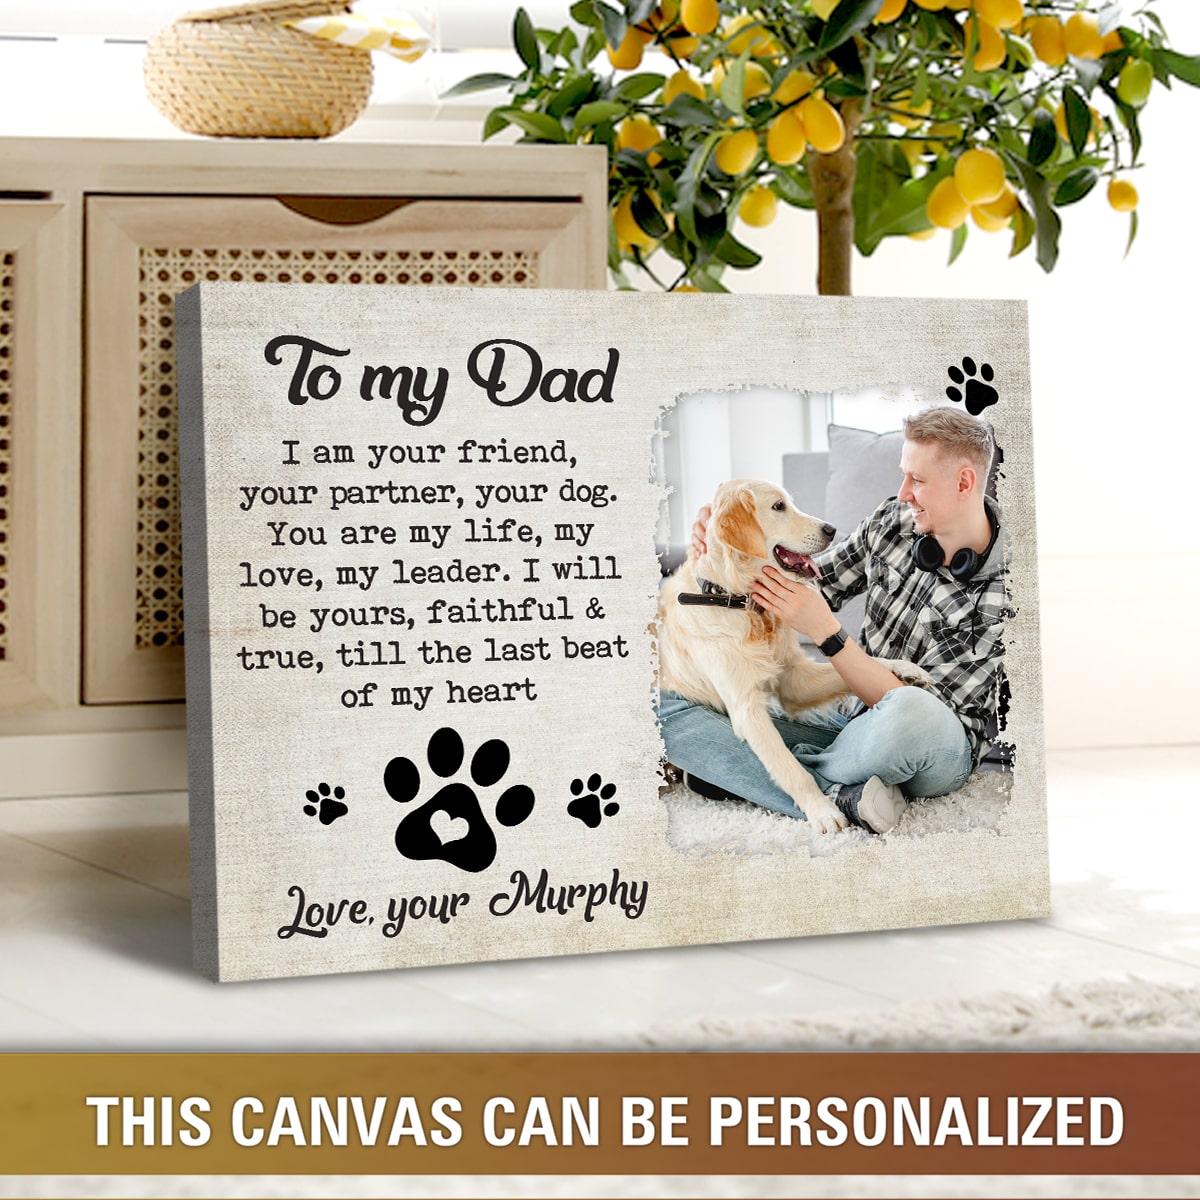 https://images.ohcanvas.com/ohcanvas_com/2022/05/17003759/fathers-day-gift-ideas-personalized-gift-for-dog-dad-canvas-print02.jpg